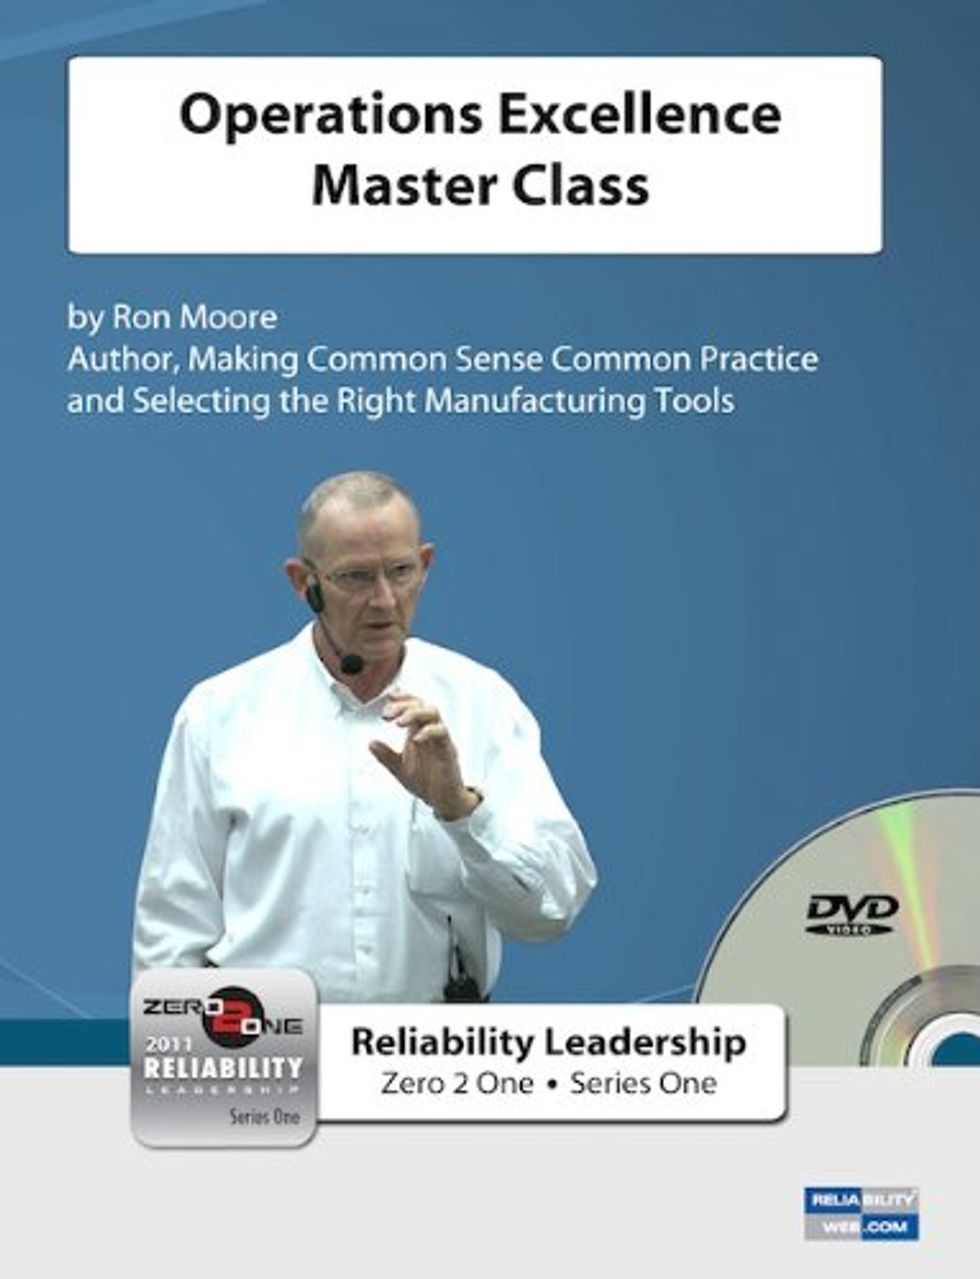  Operations Excellence Master Class (DVD) 